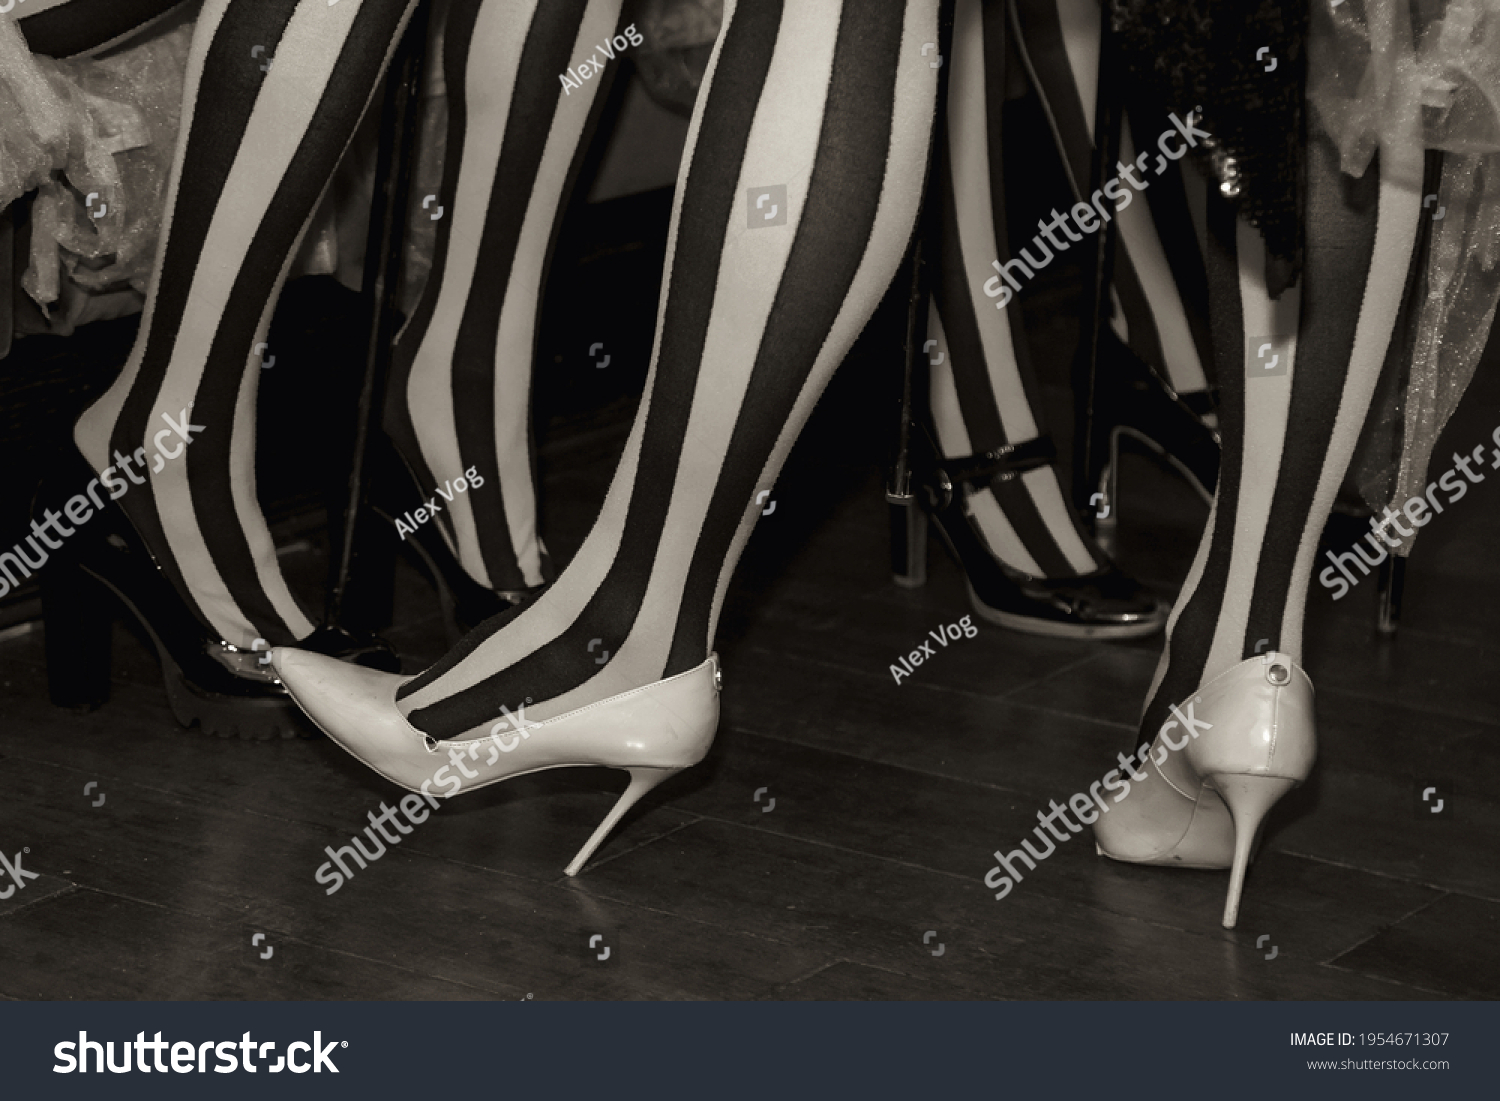 Close-up of legs of circus performer in suit and striped red-black stockings in dressing room. Circus performer waiting for an invitation to enter stage or arena. Concert performance for backgrounds #1954671307